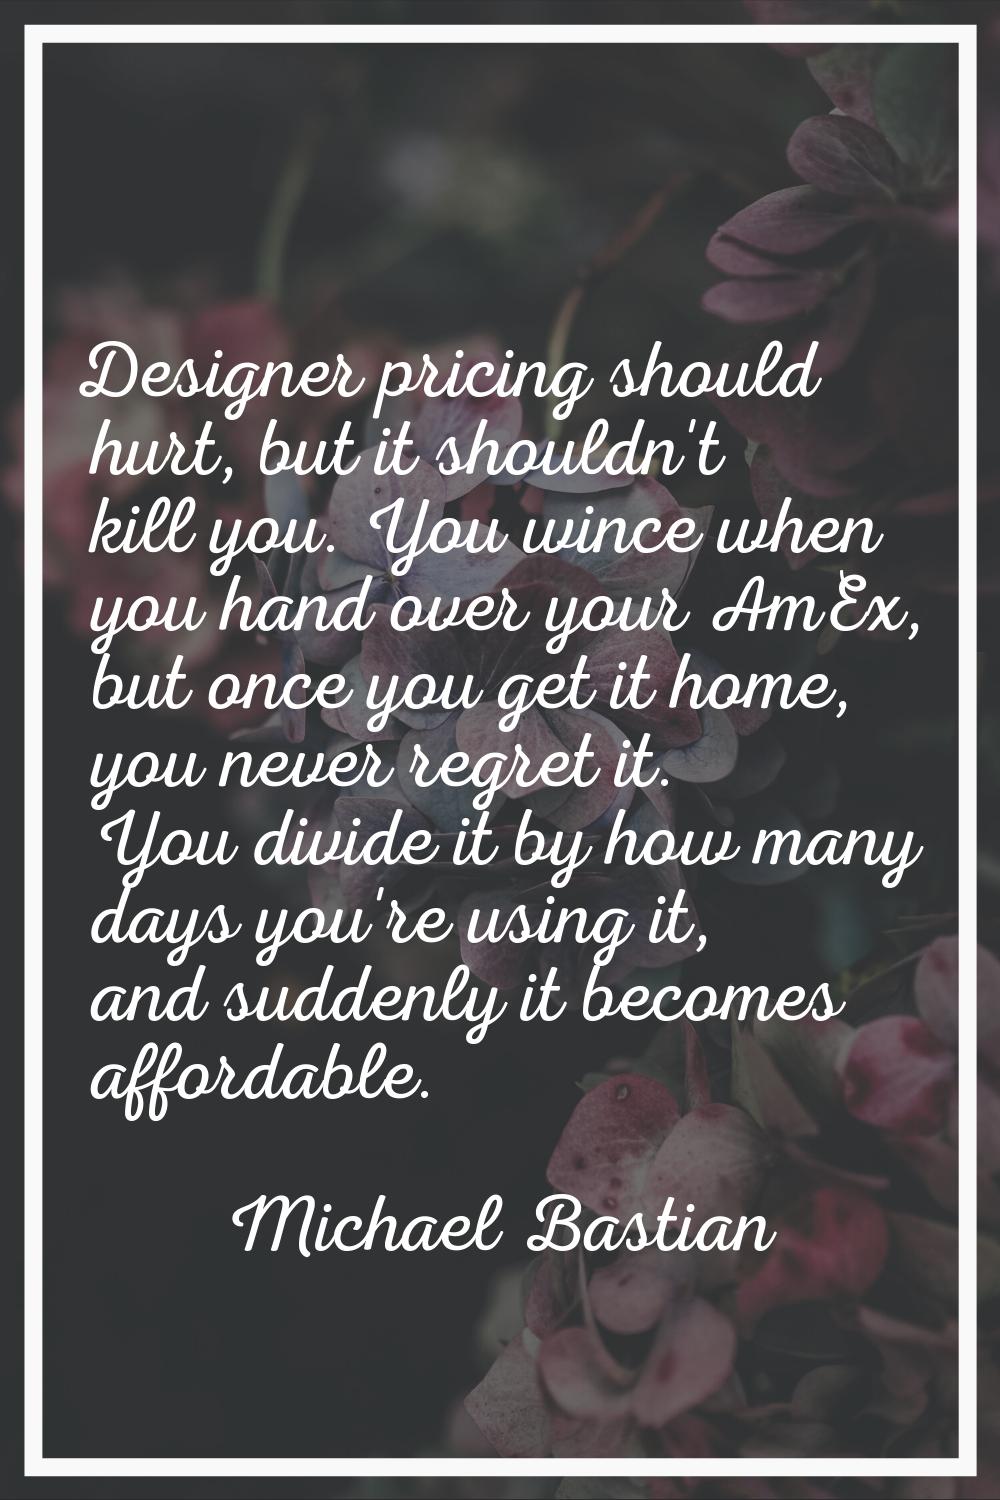 Designer pricing should hurt, but it shouldn't kill you. You wince when you hand over your AmEx, bu